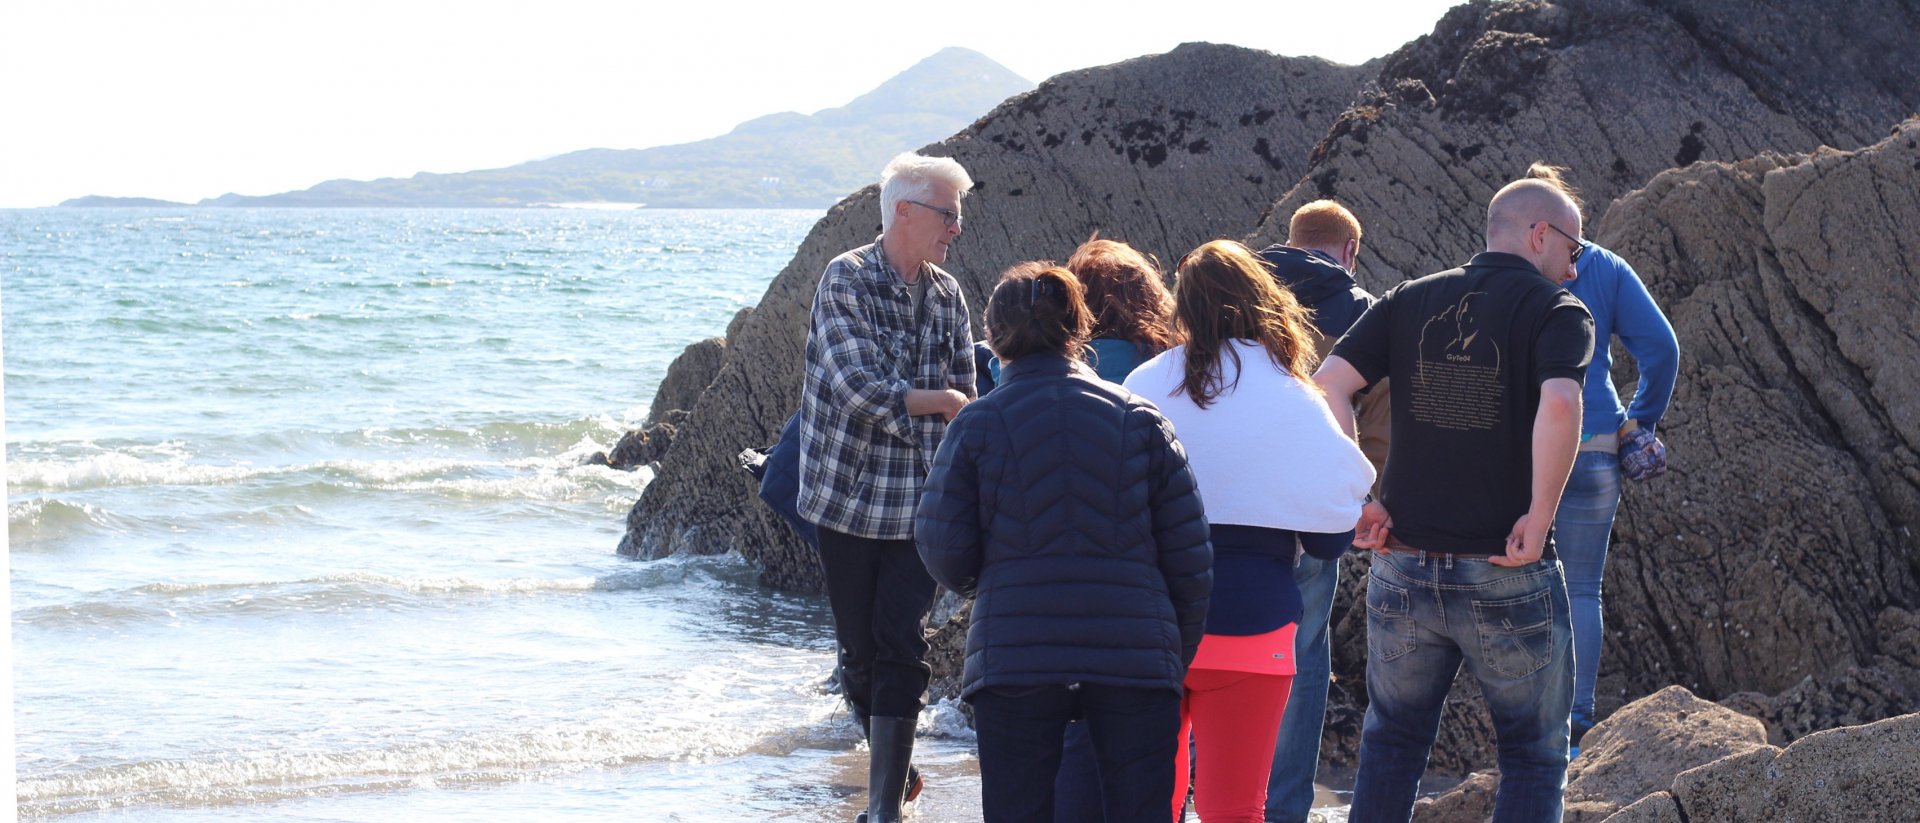 Active Guided Tours of Ireland | Vagabond